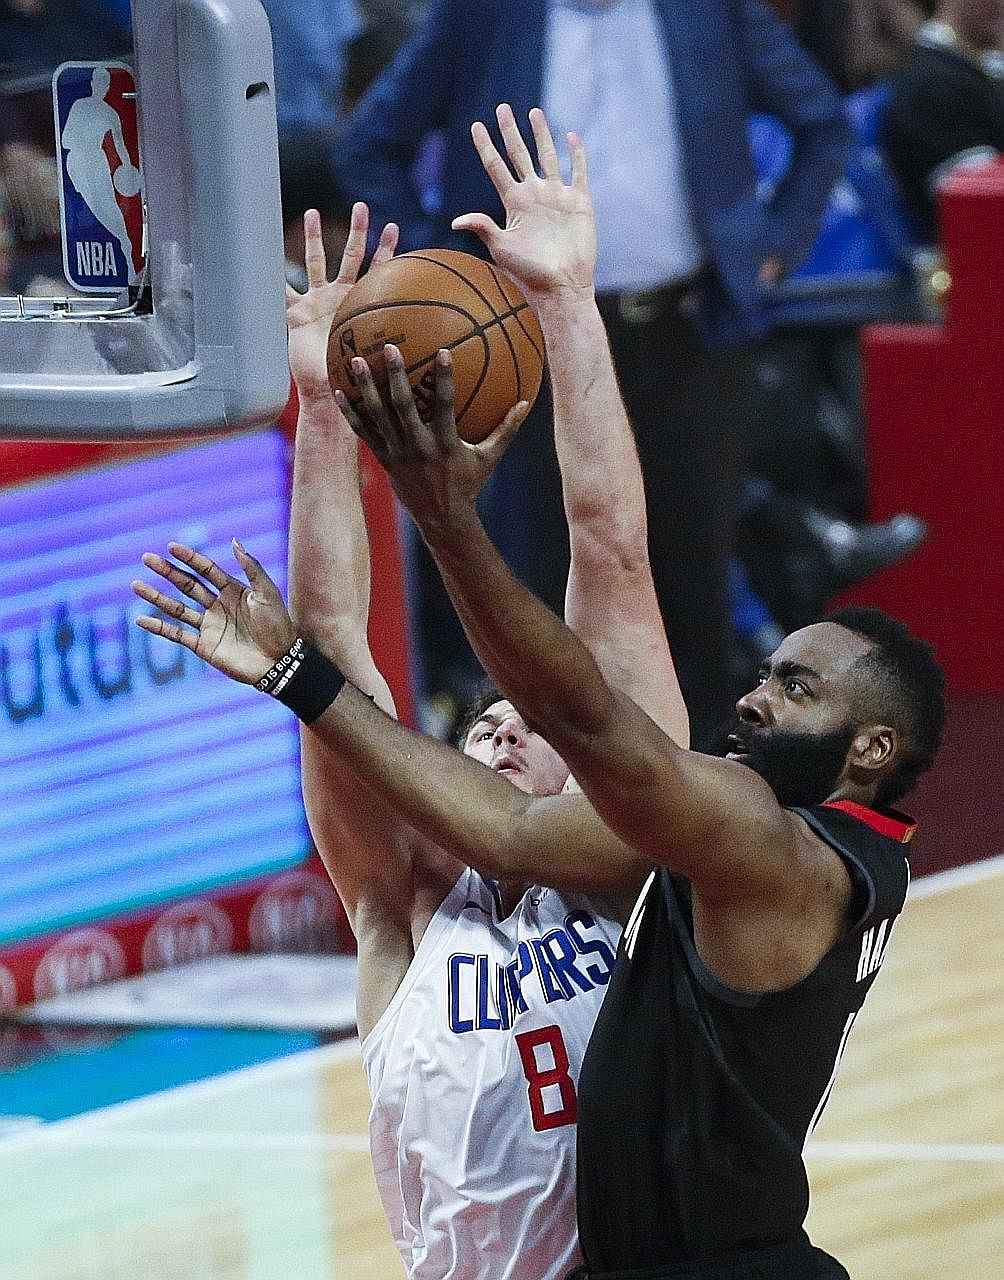 Houston Rockets star James Harden going for a basket as the LA Clippers' Danilo Gallinari blocks him in their NBA game at the Staples Centre on Wednesday.